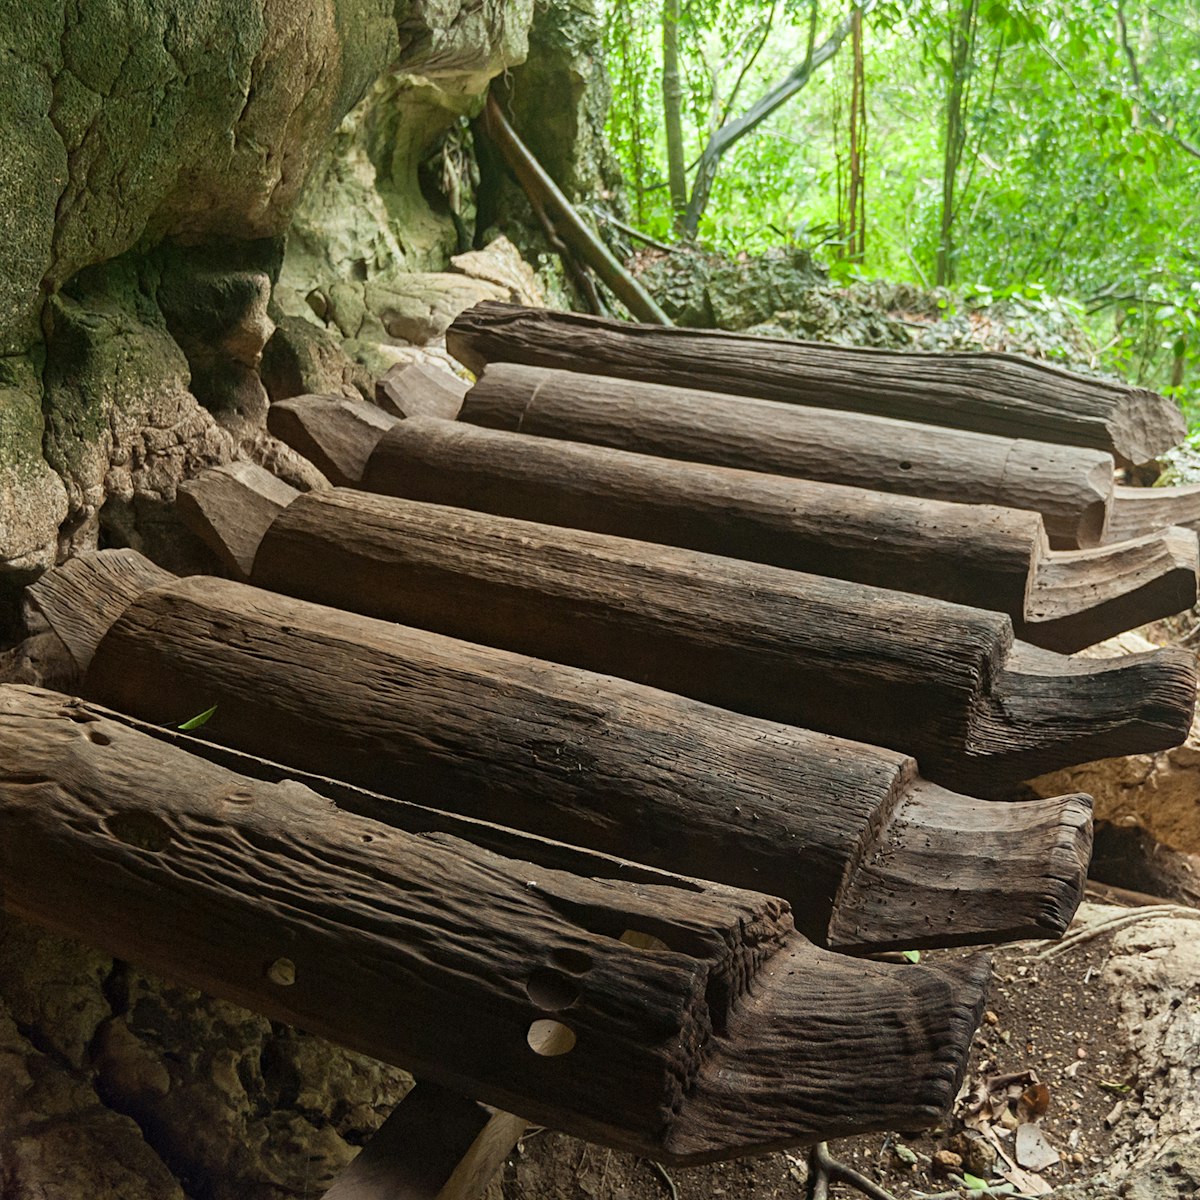 Kinabatangan Sabah Malaysia May 9, 2016 : Carved coffin made from belian tree believed to be about 500-690 years old at ancient burial cave Agop Batu Tulug in Kinabatangan Sabah.; Shutterstock ID 419637439; Your name (First / Last): Lauren Vastine; GL account no.: 65050; Netsuite department name: Online Editorial; Full Product or Project name including edition: BiA Imagery